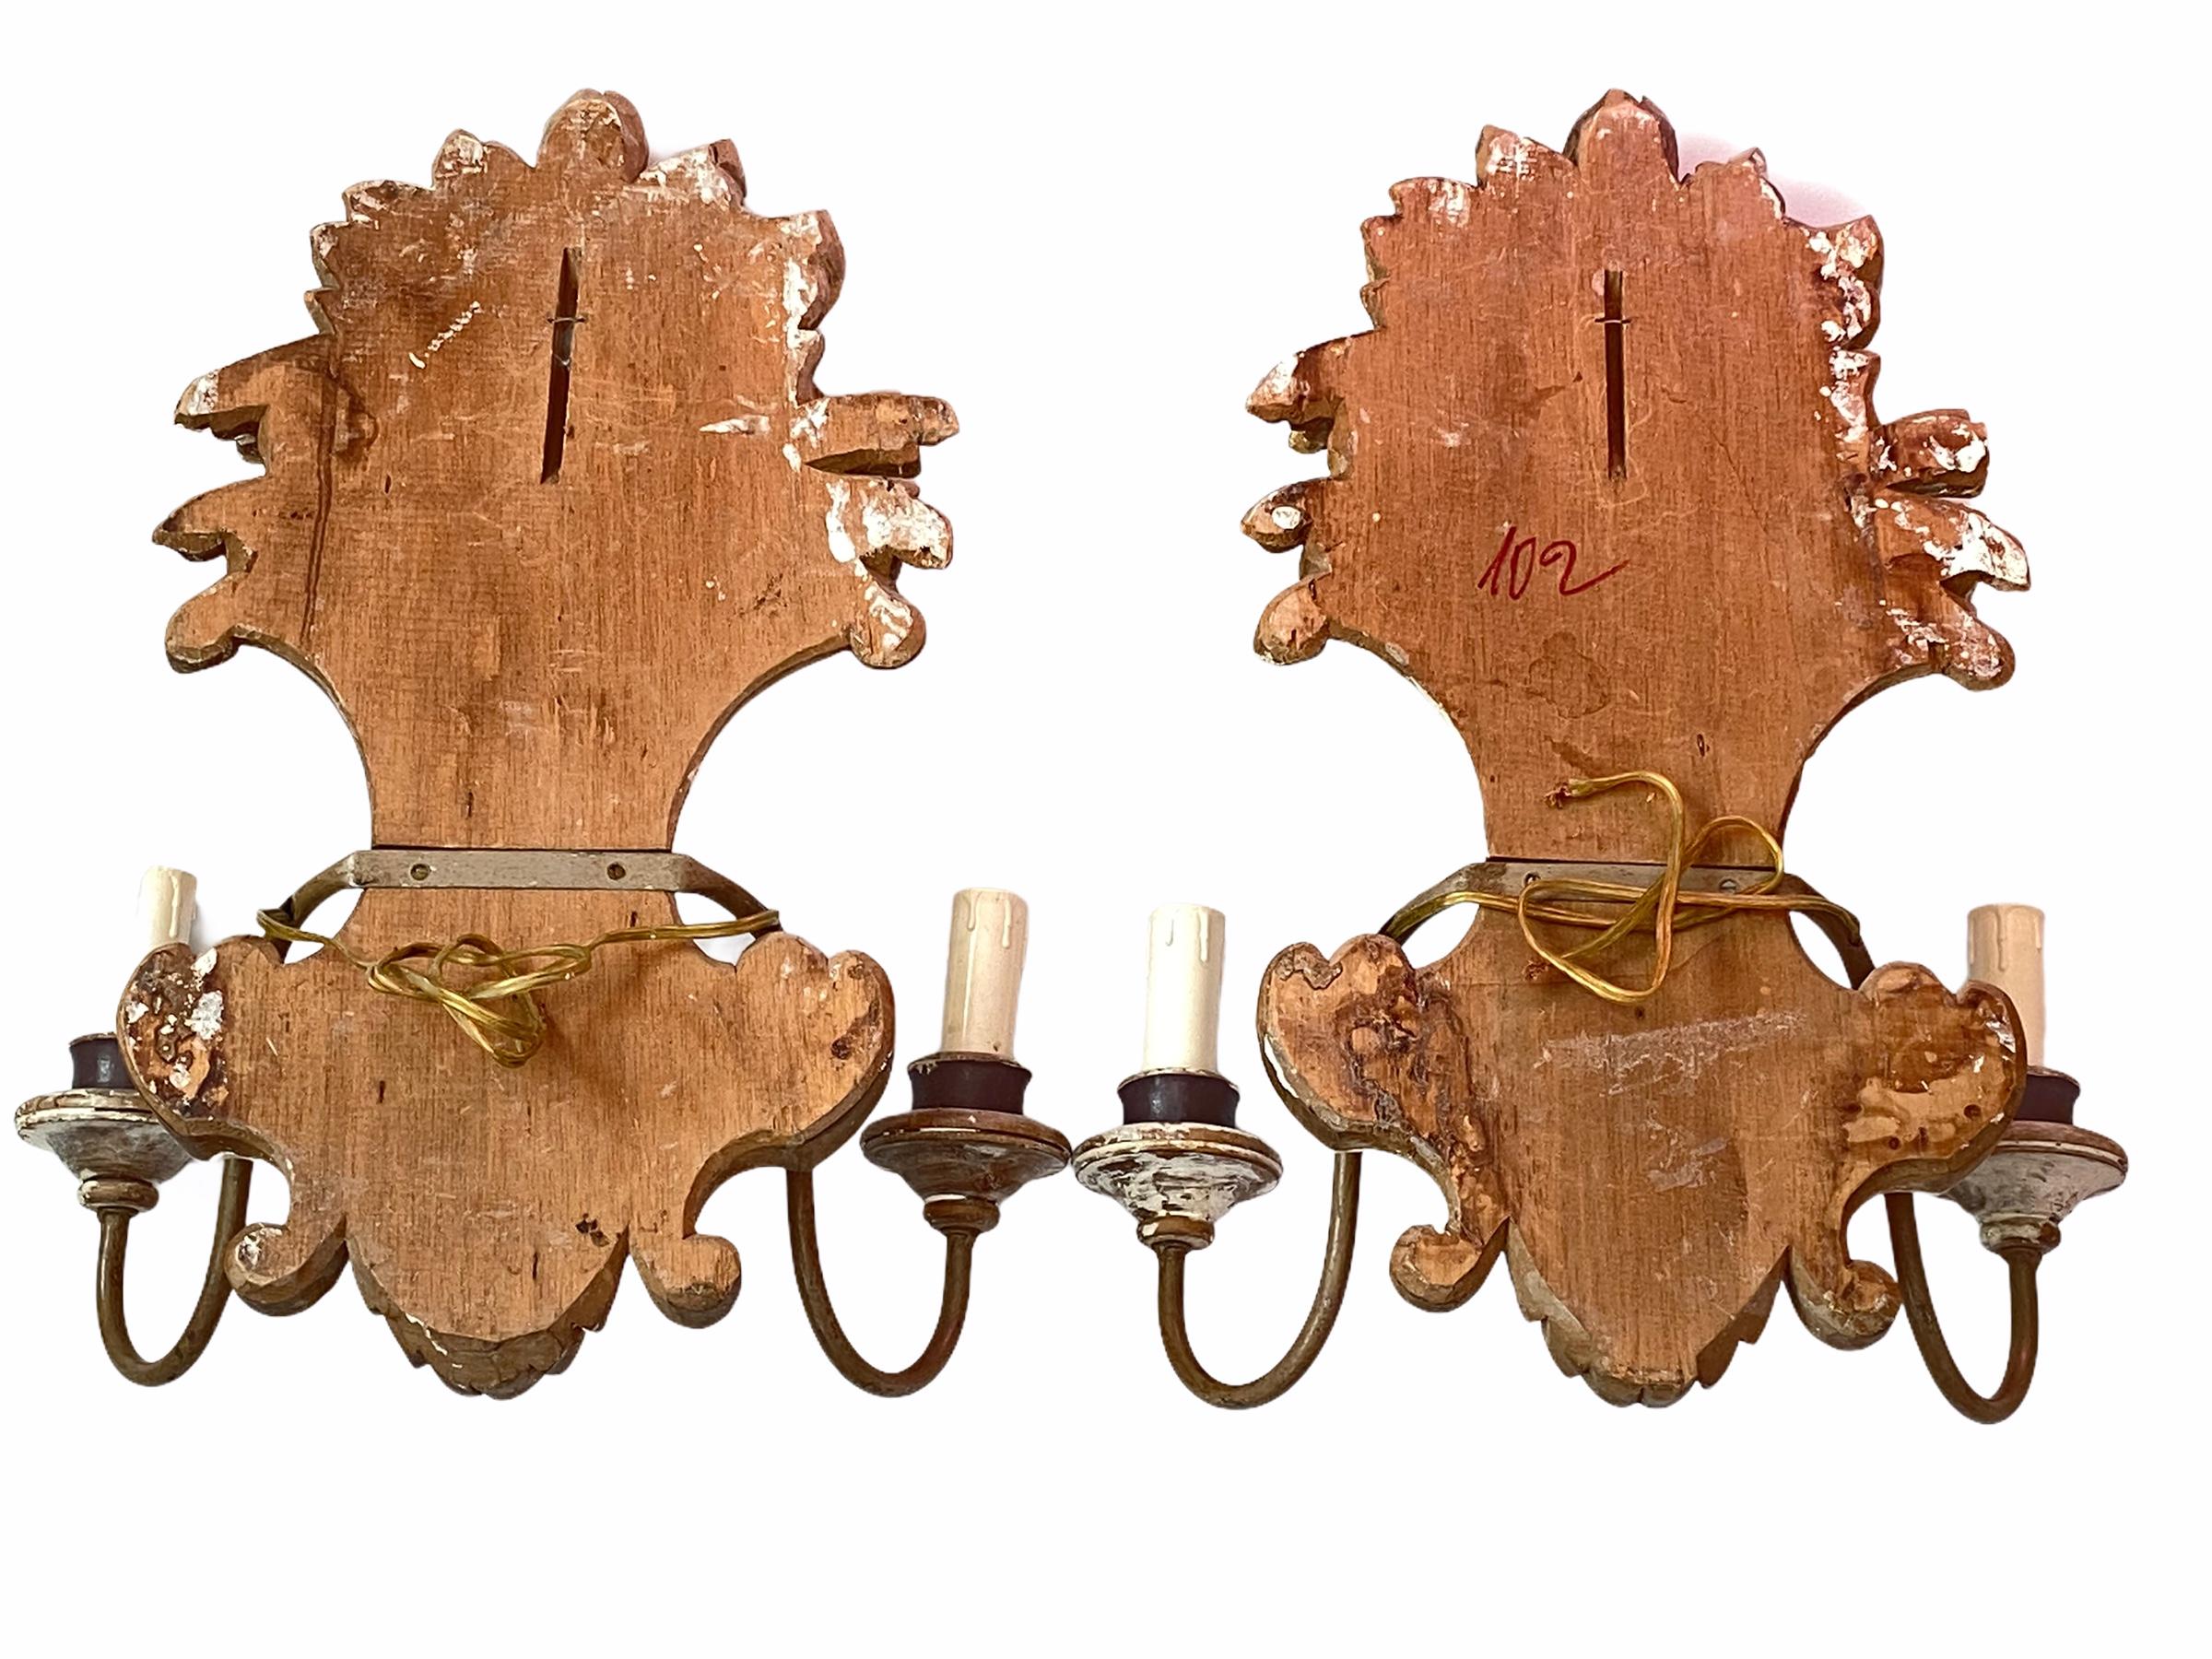 Pair of Wooden Carved Tole Toleware Sconces Chippywhite Gilt Flowers, Italy For Sale 3